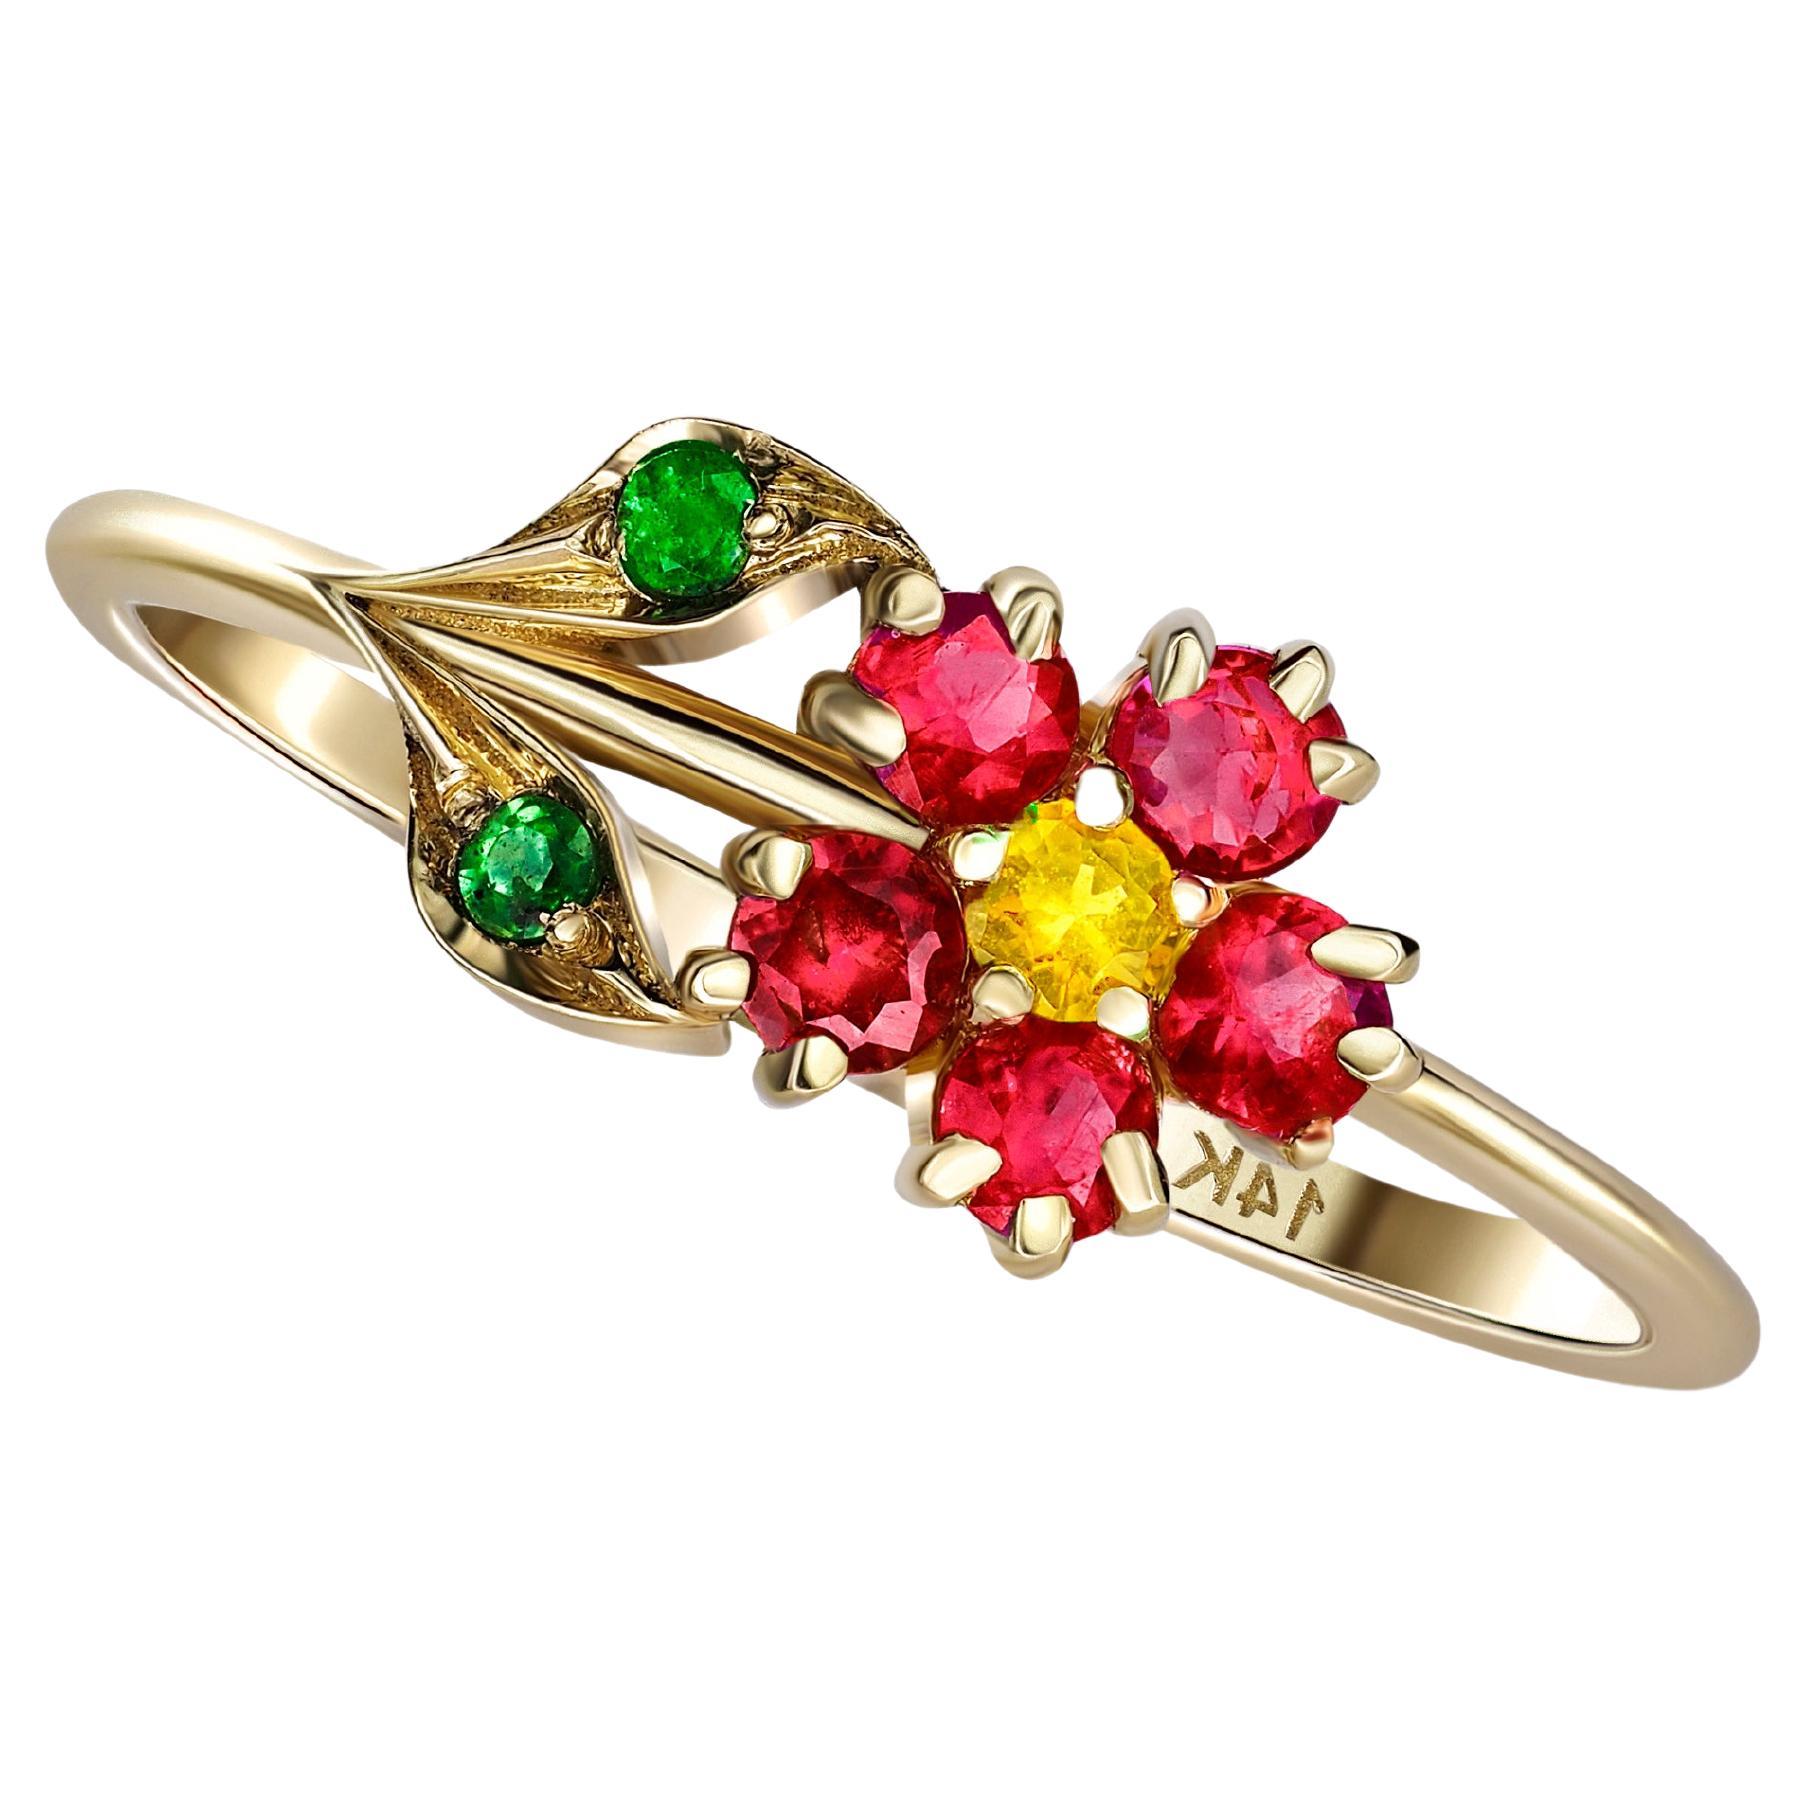 Flower Ring in 14 Karat Gold, Sapphire, Garnet and Chrome Diopsides Ring.  For Sale